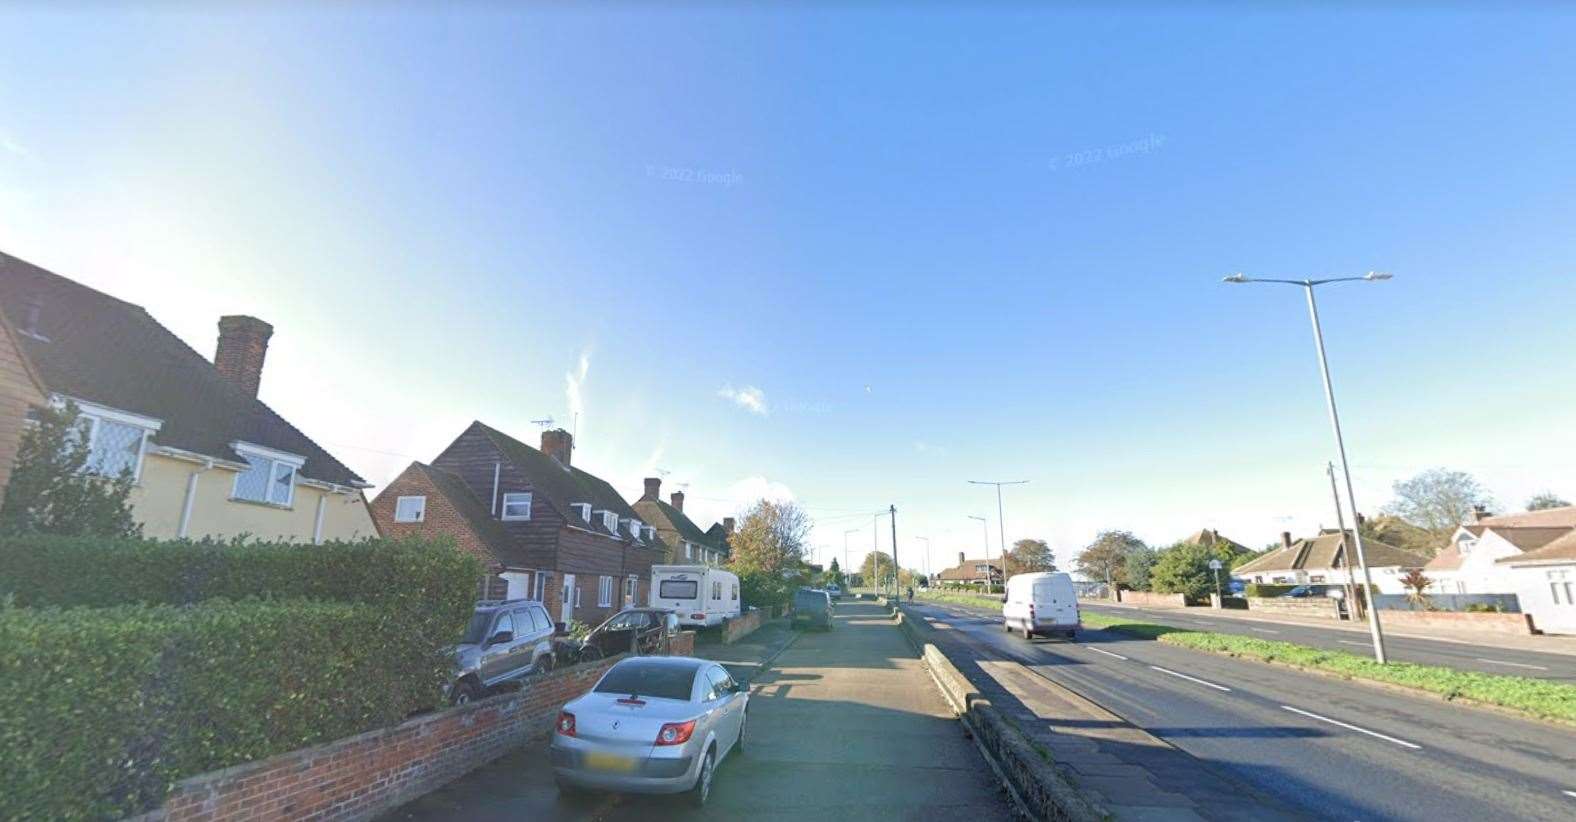 A28 Canterbury Road, where the vandalism occured. Picture: Google